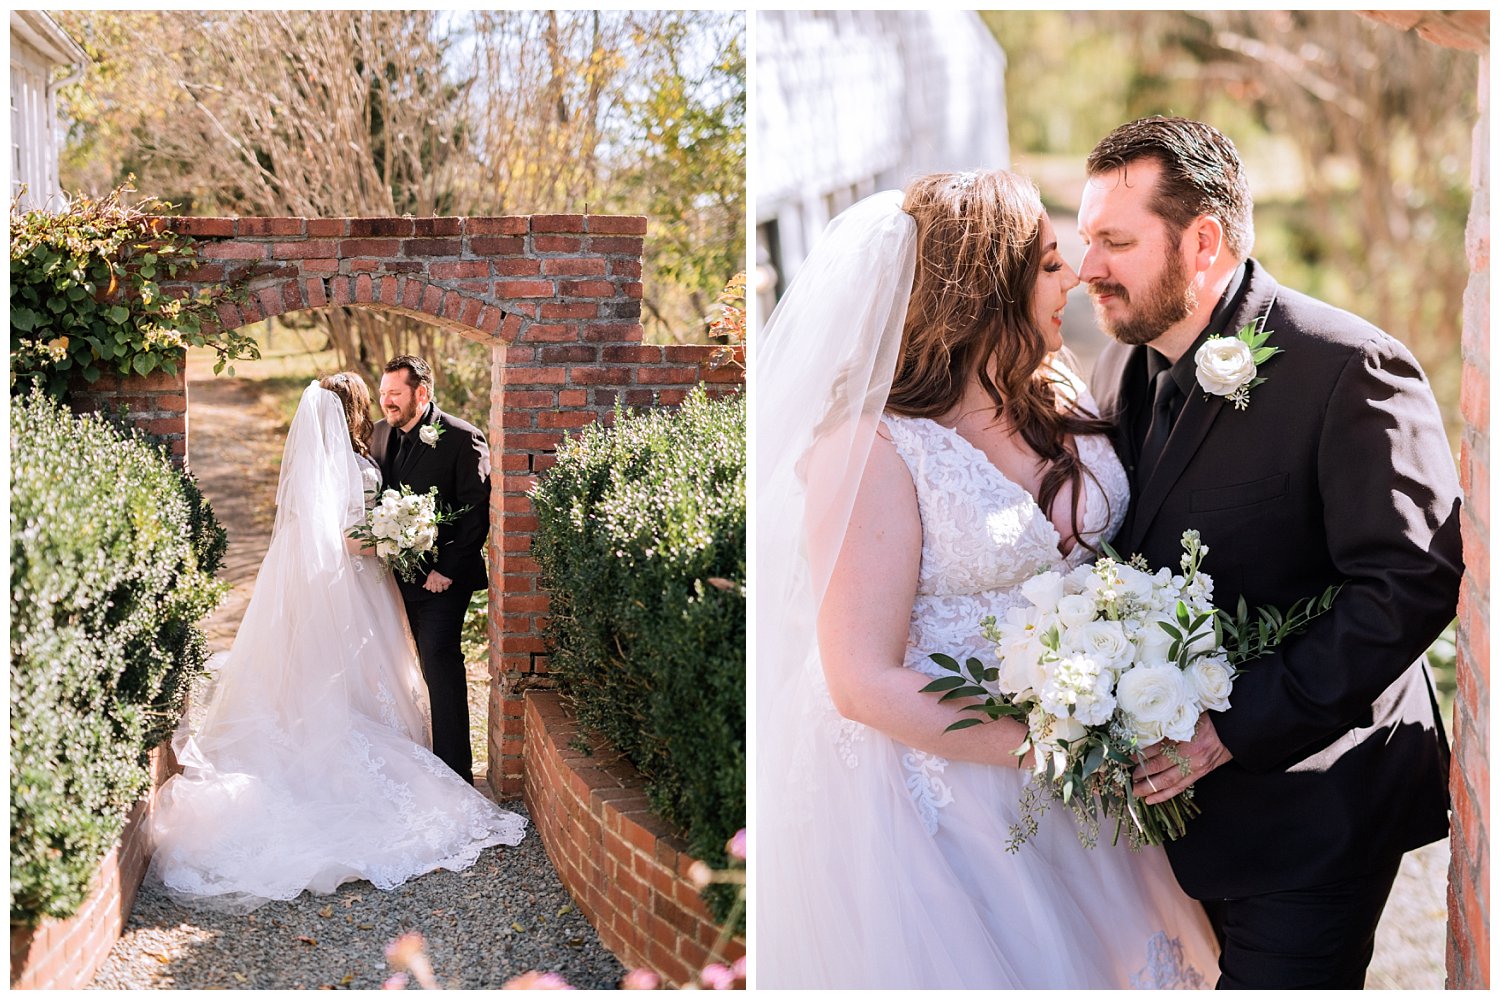 Bride and Groom portraits at their intimate microwedding at Clifton Inn in Charlottesville, Virginia